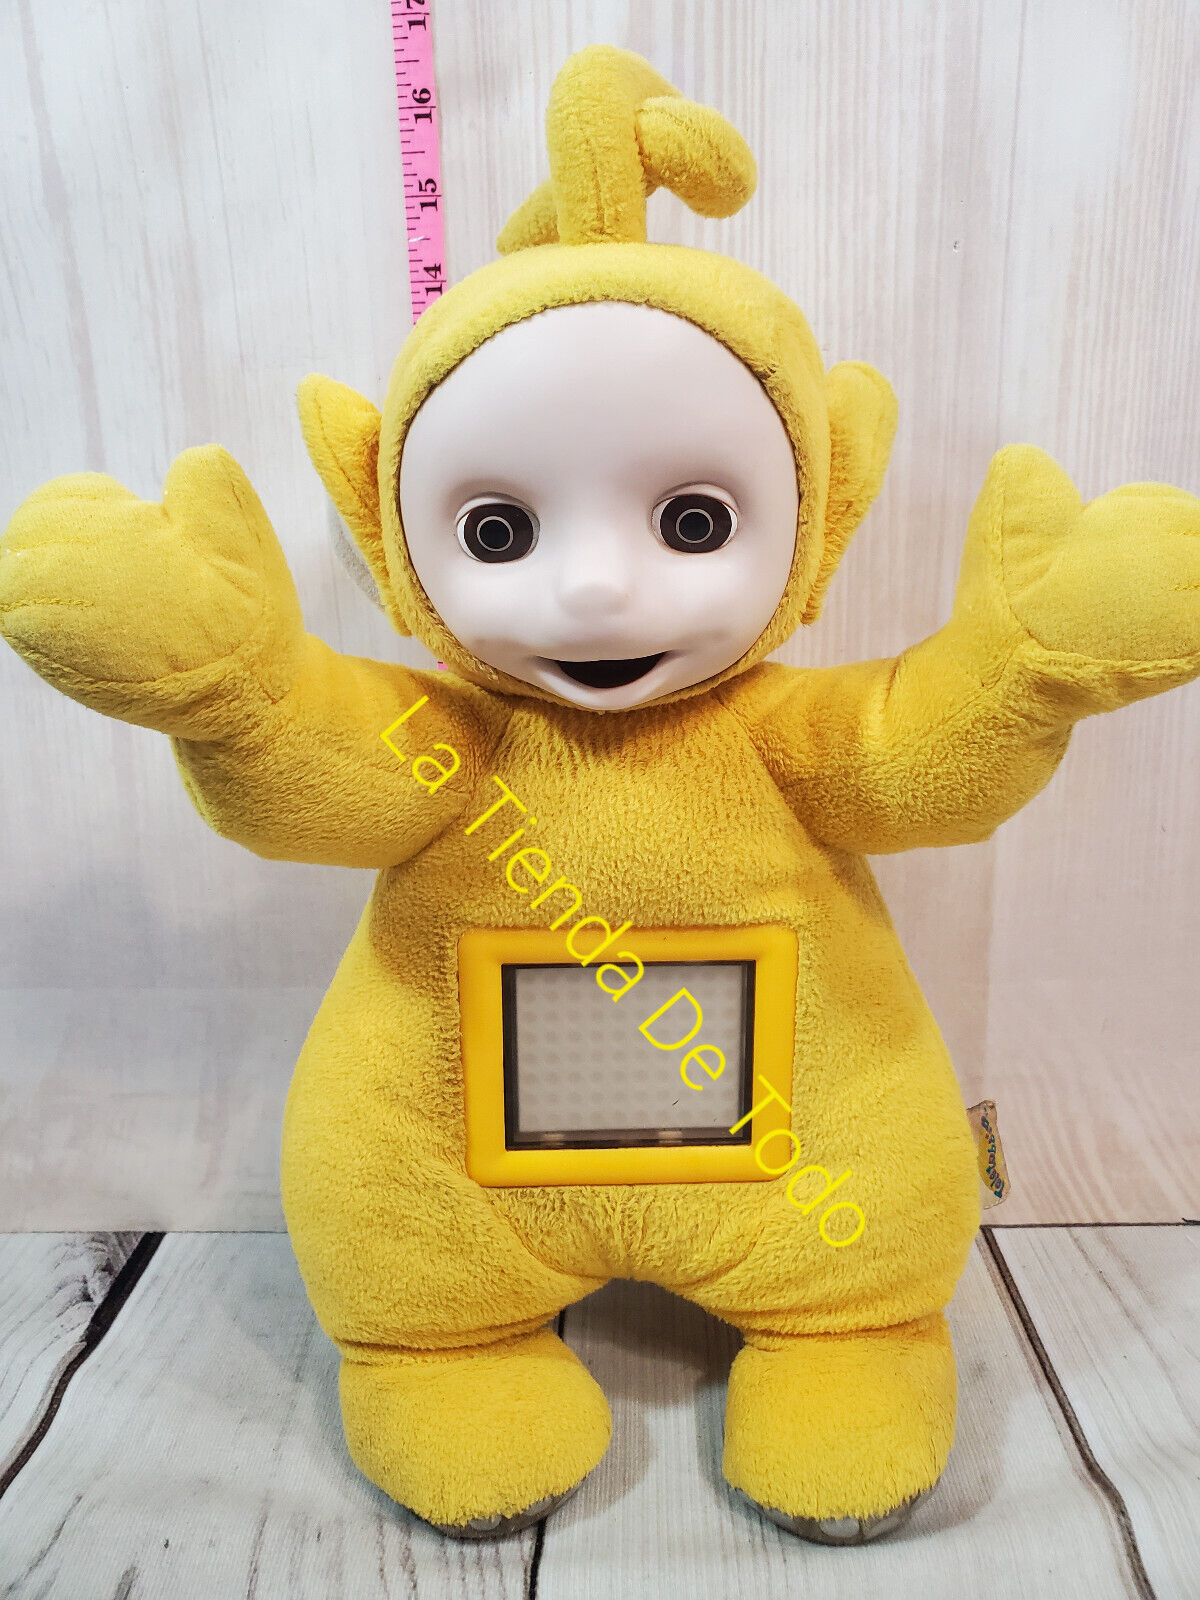 RARE VINTAGE BATTERY OPERATED TALKING FIGURE FOR MICROSOFT TELETUBBIES FANS READ